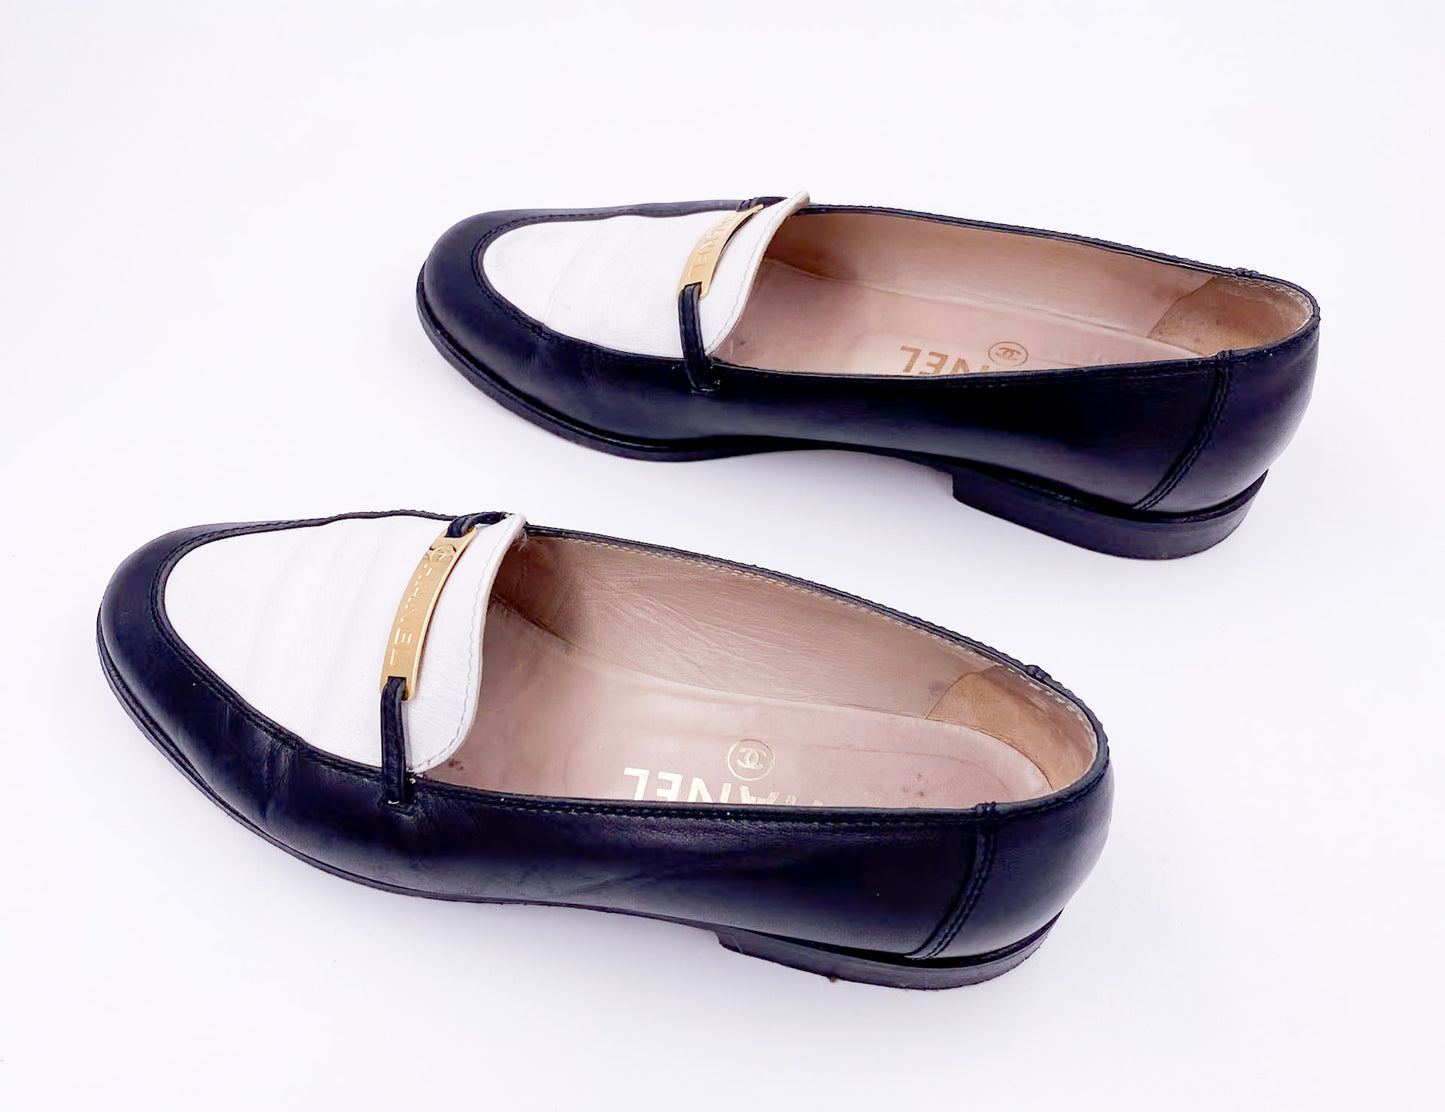 Chanel Black/White Loafers with Gold Emblem